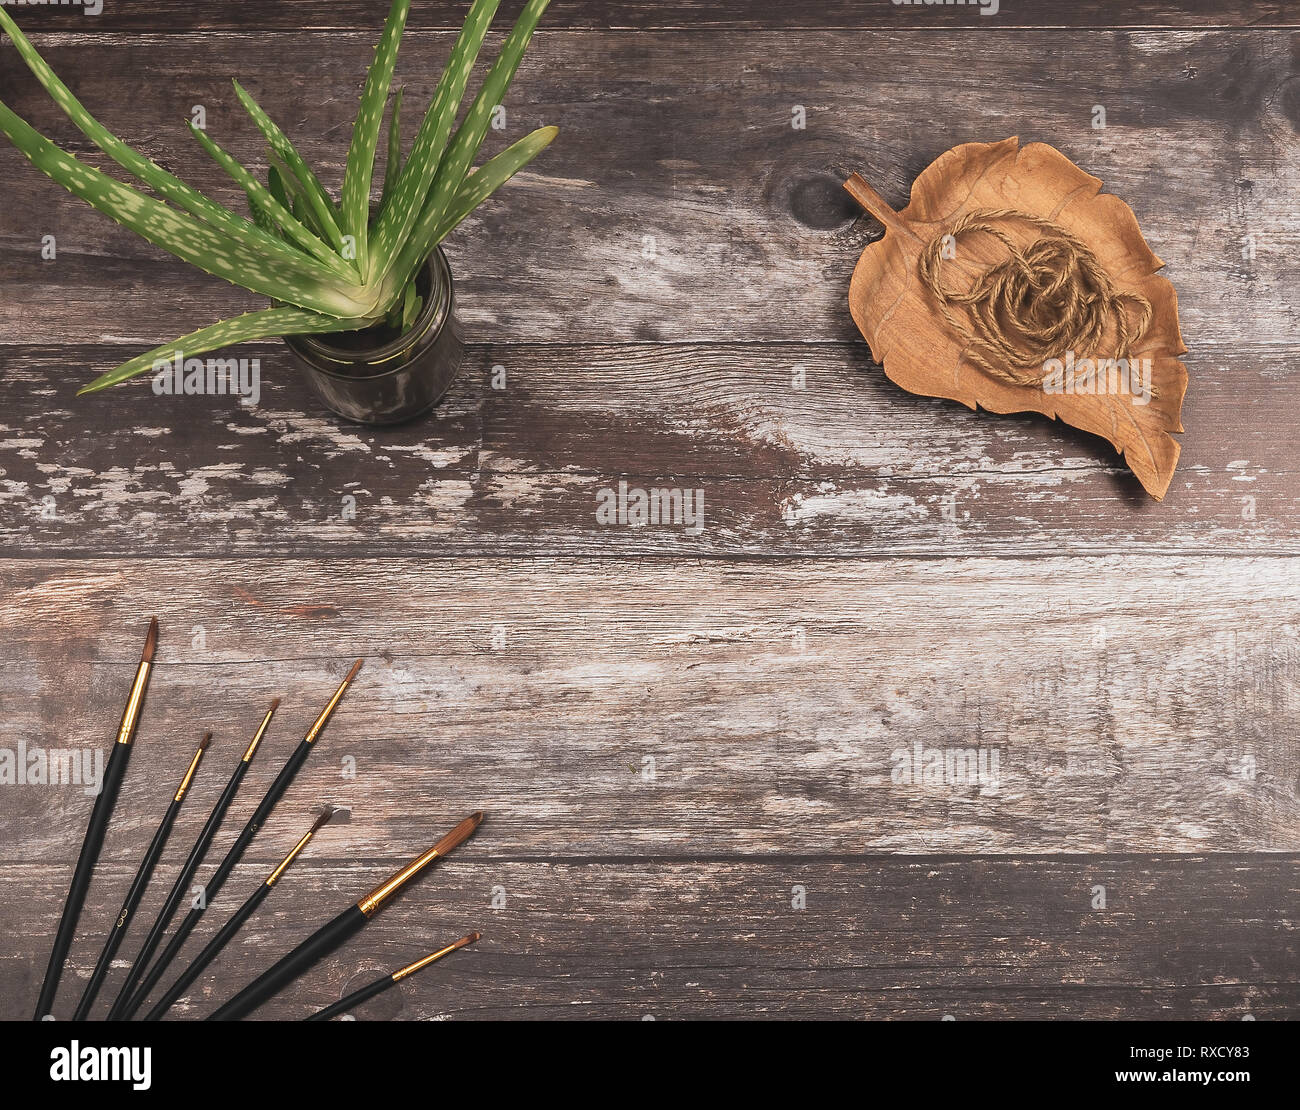 Top view of paintbrushes, natural twine and a green Aloe vera plant on rustic wood background with copyspace - Concept of artistic creative artwork Stock Photo